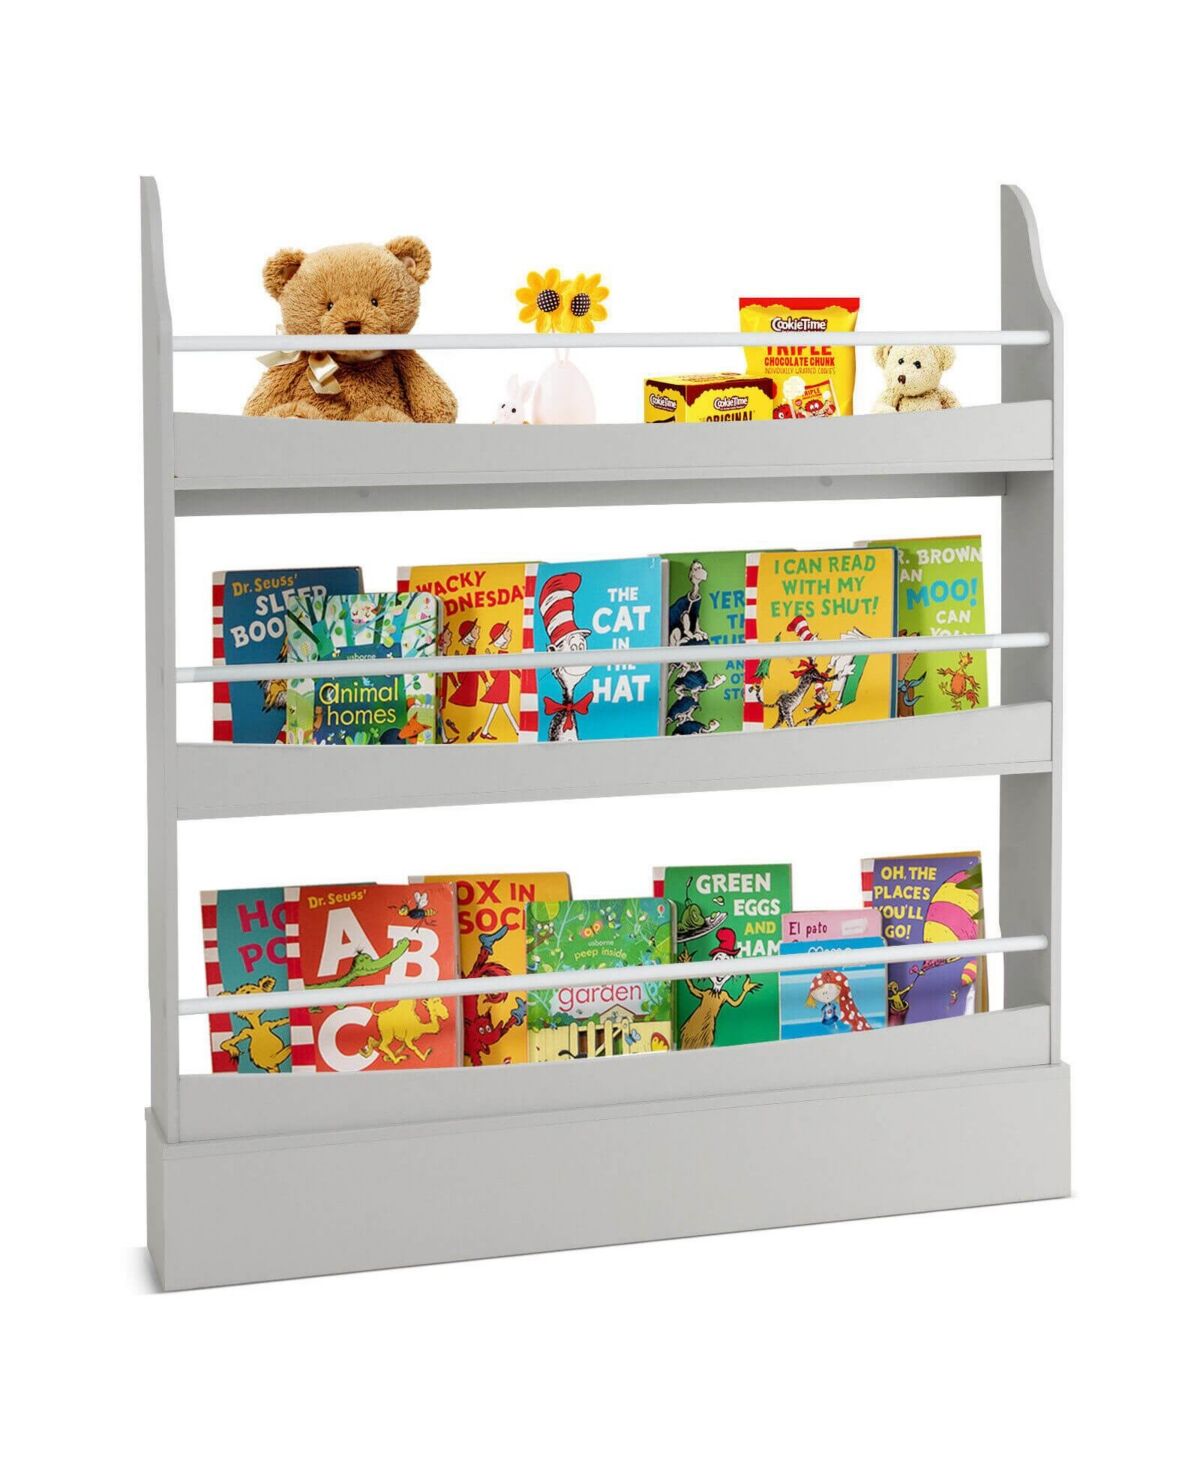 Slickblue 3-Tier Bookshelf with 2 Anti-Tipping Kits for Books and Magazines - Grey